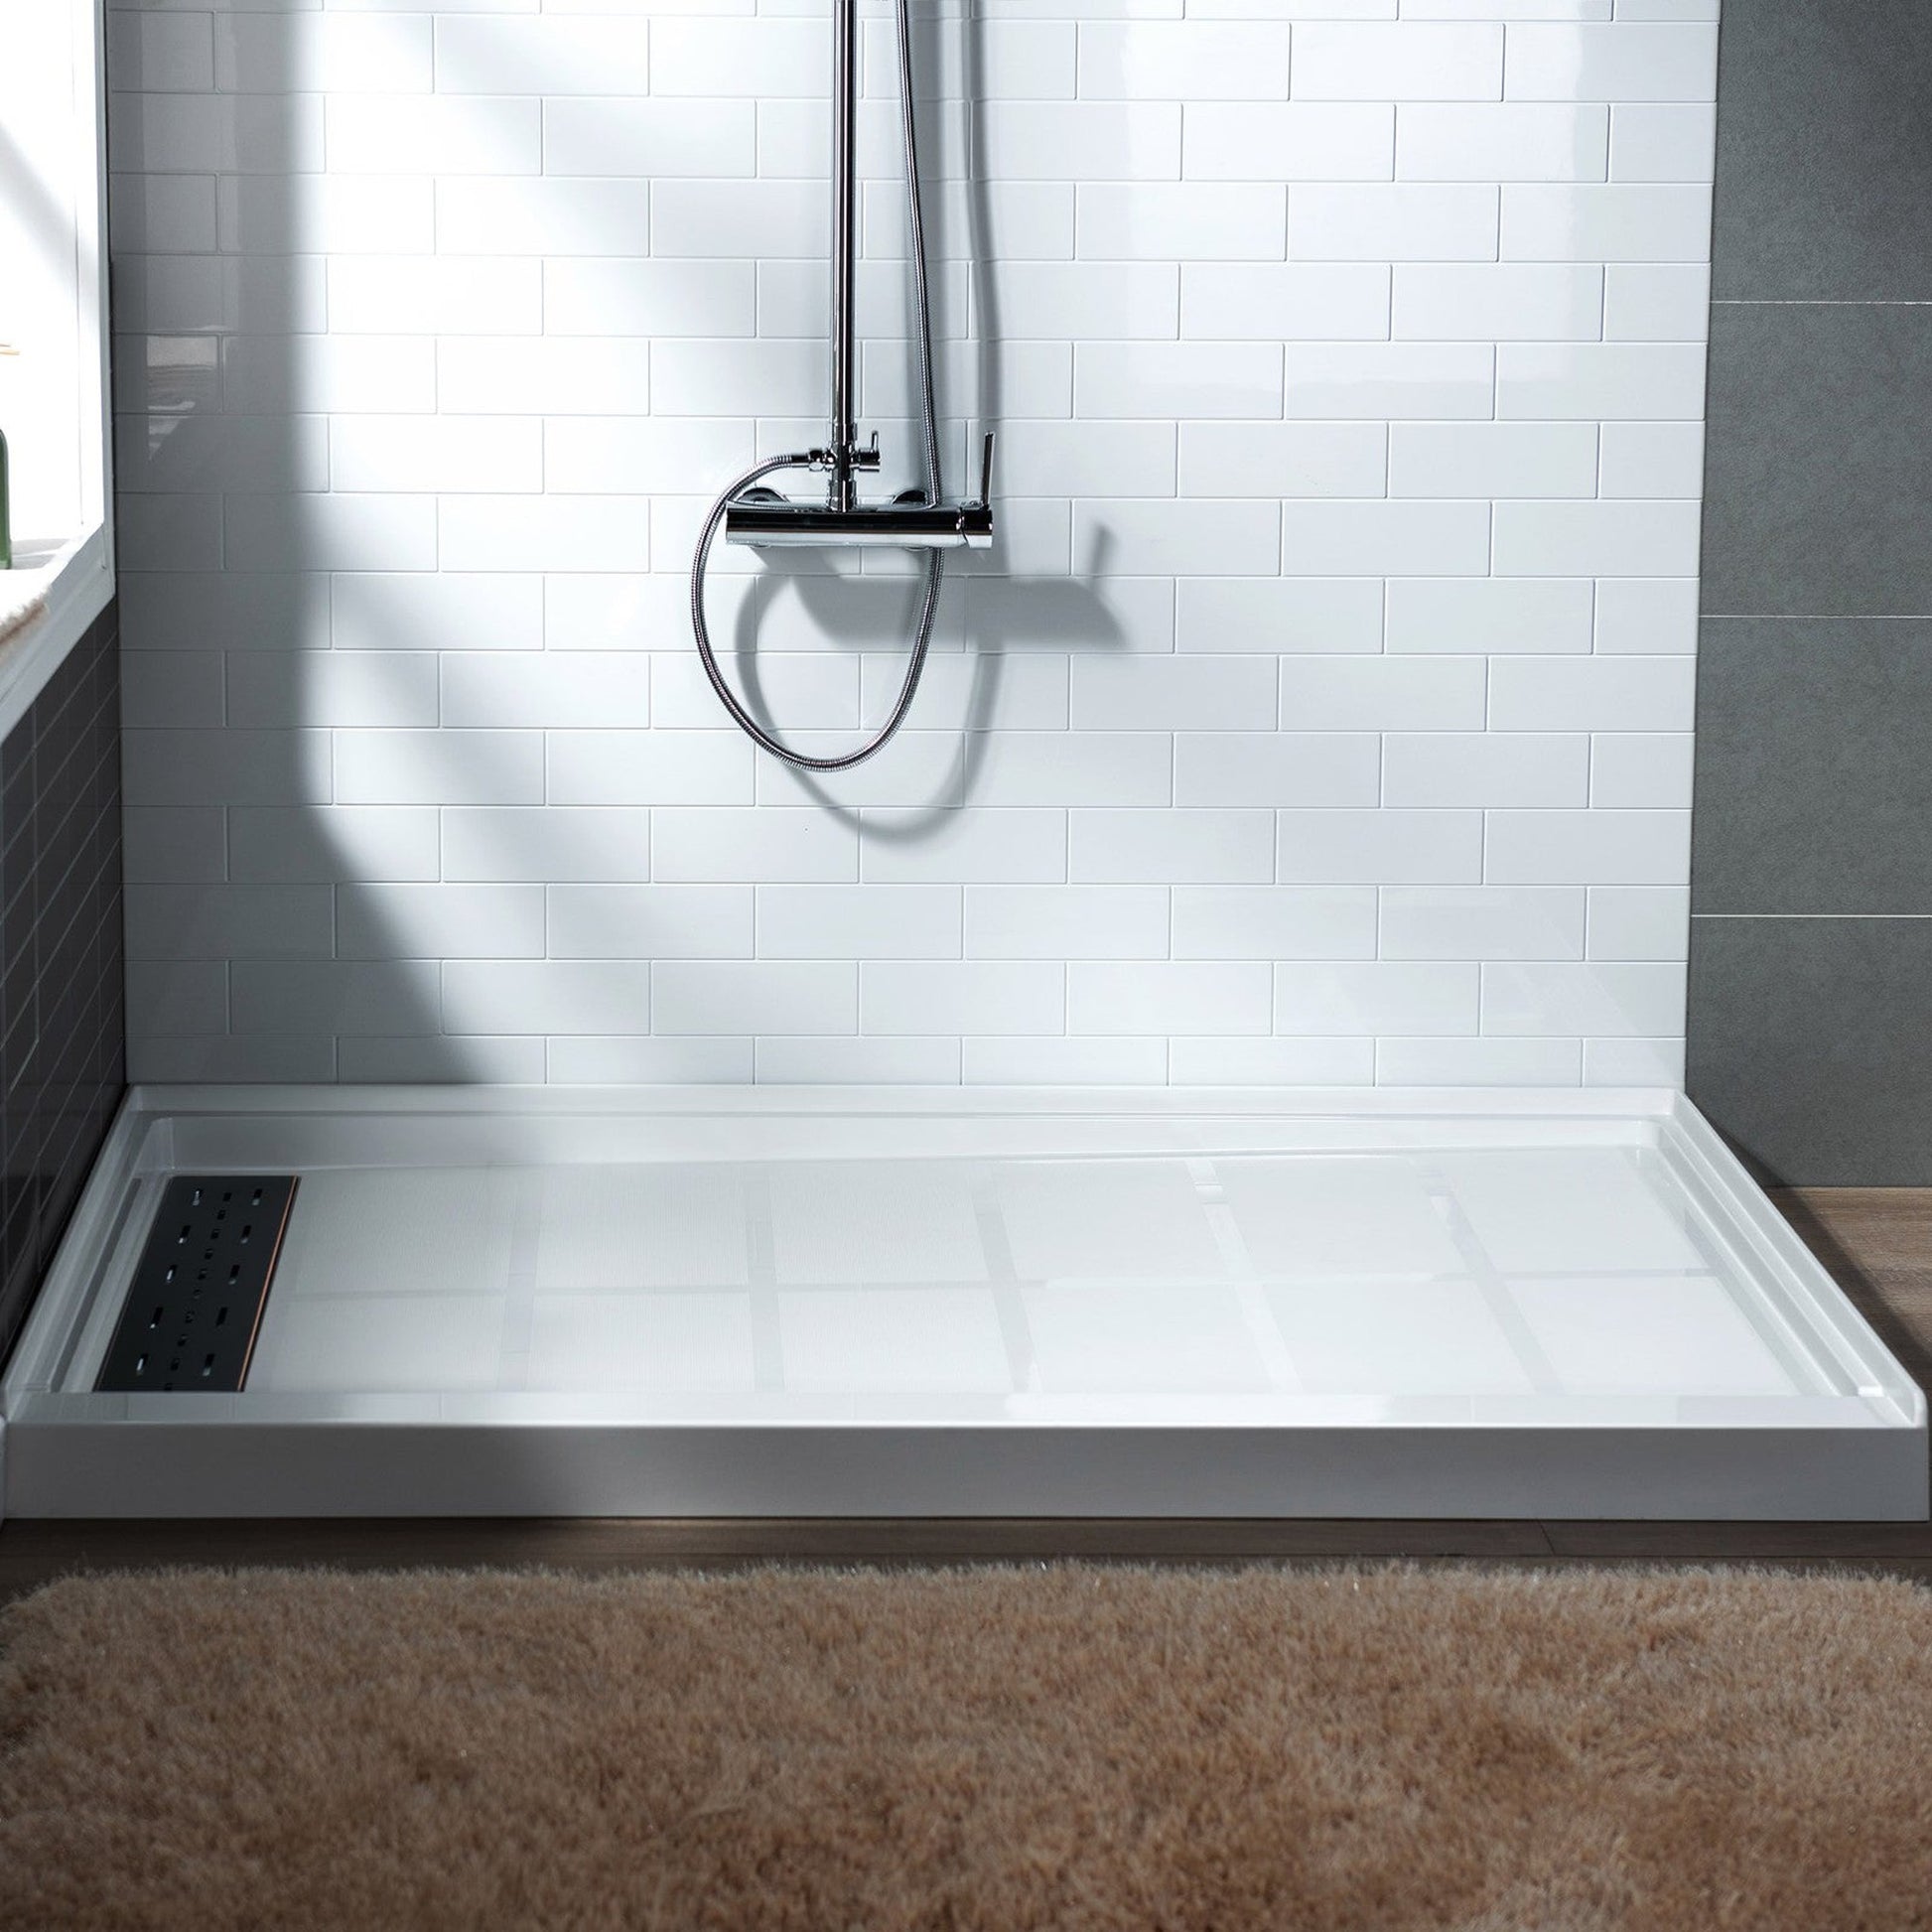 WoodBridge 60" x 34" White Solid Surface Shower Base Left Drain Location With Oil Rubbed Bronze Trench Drain Cover